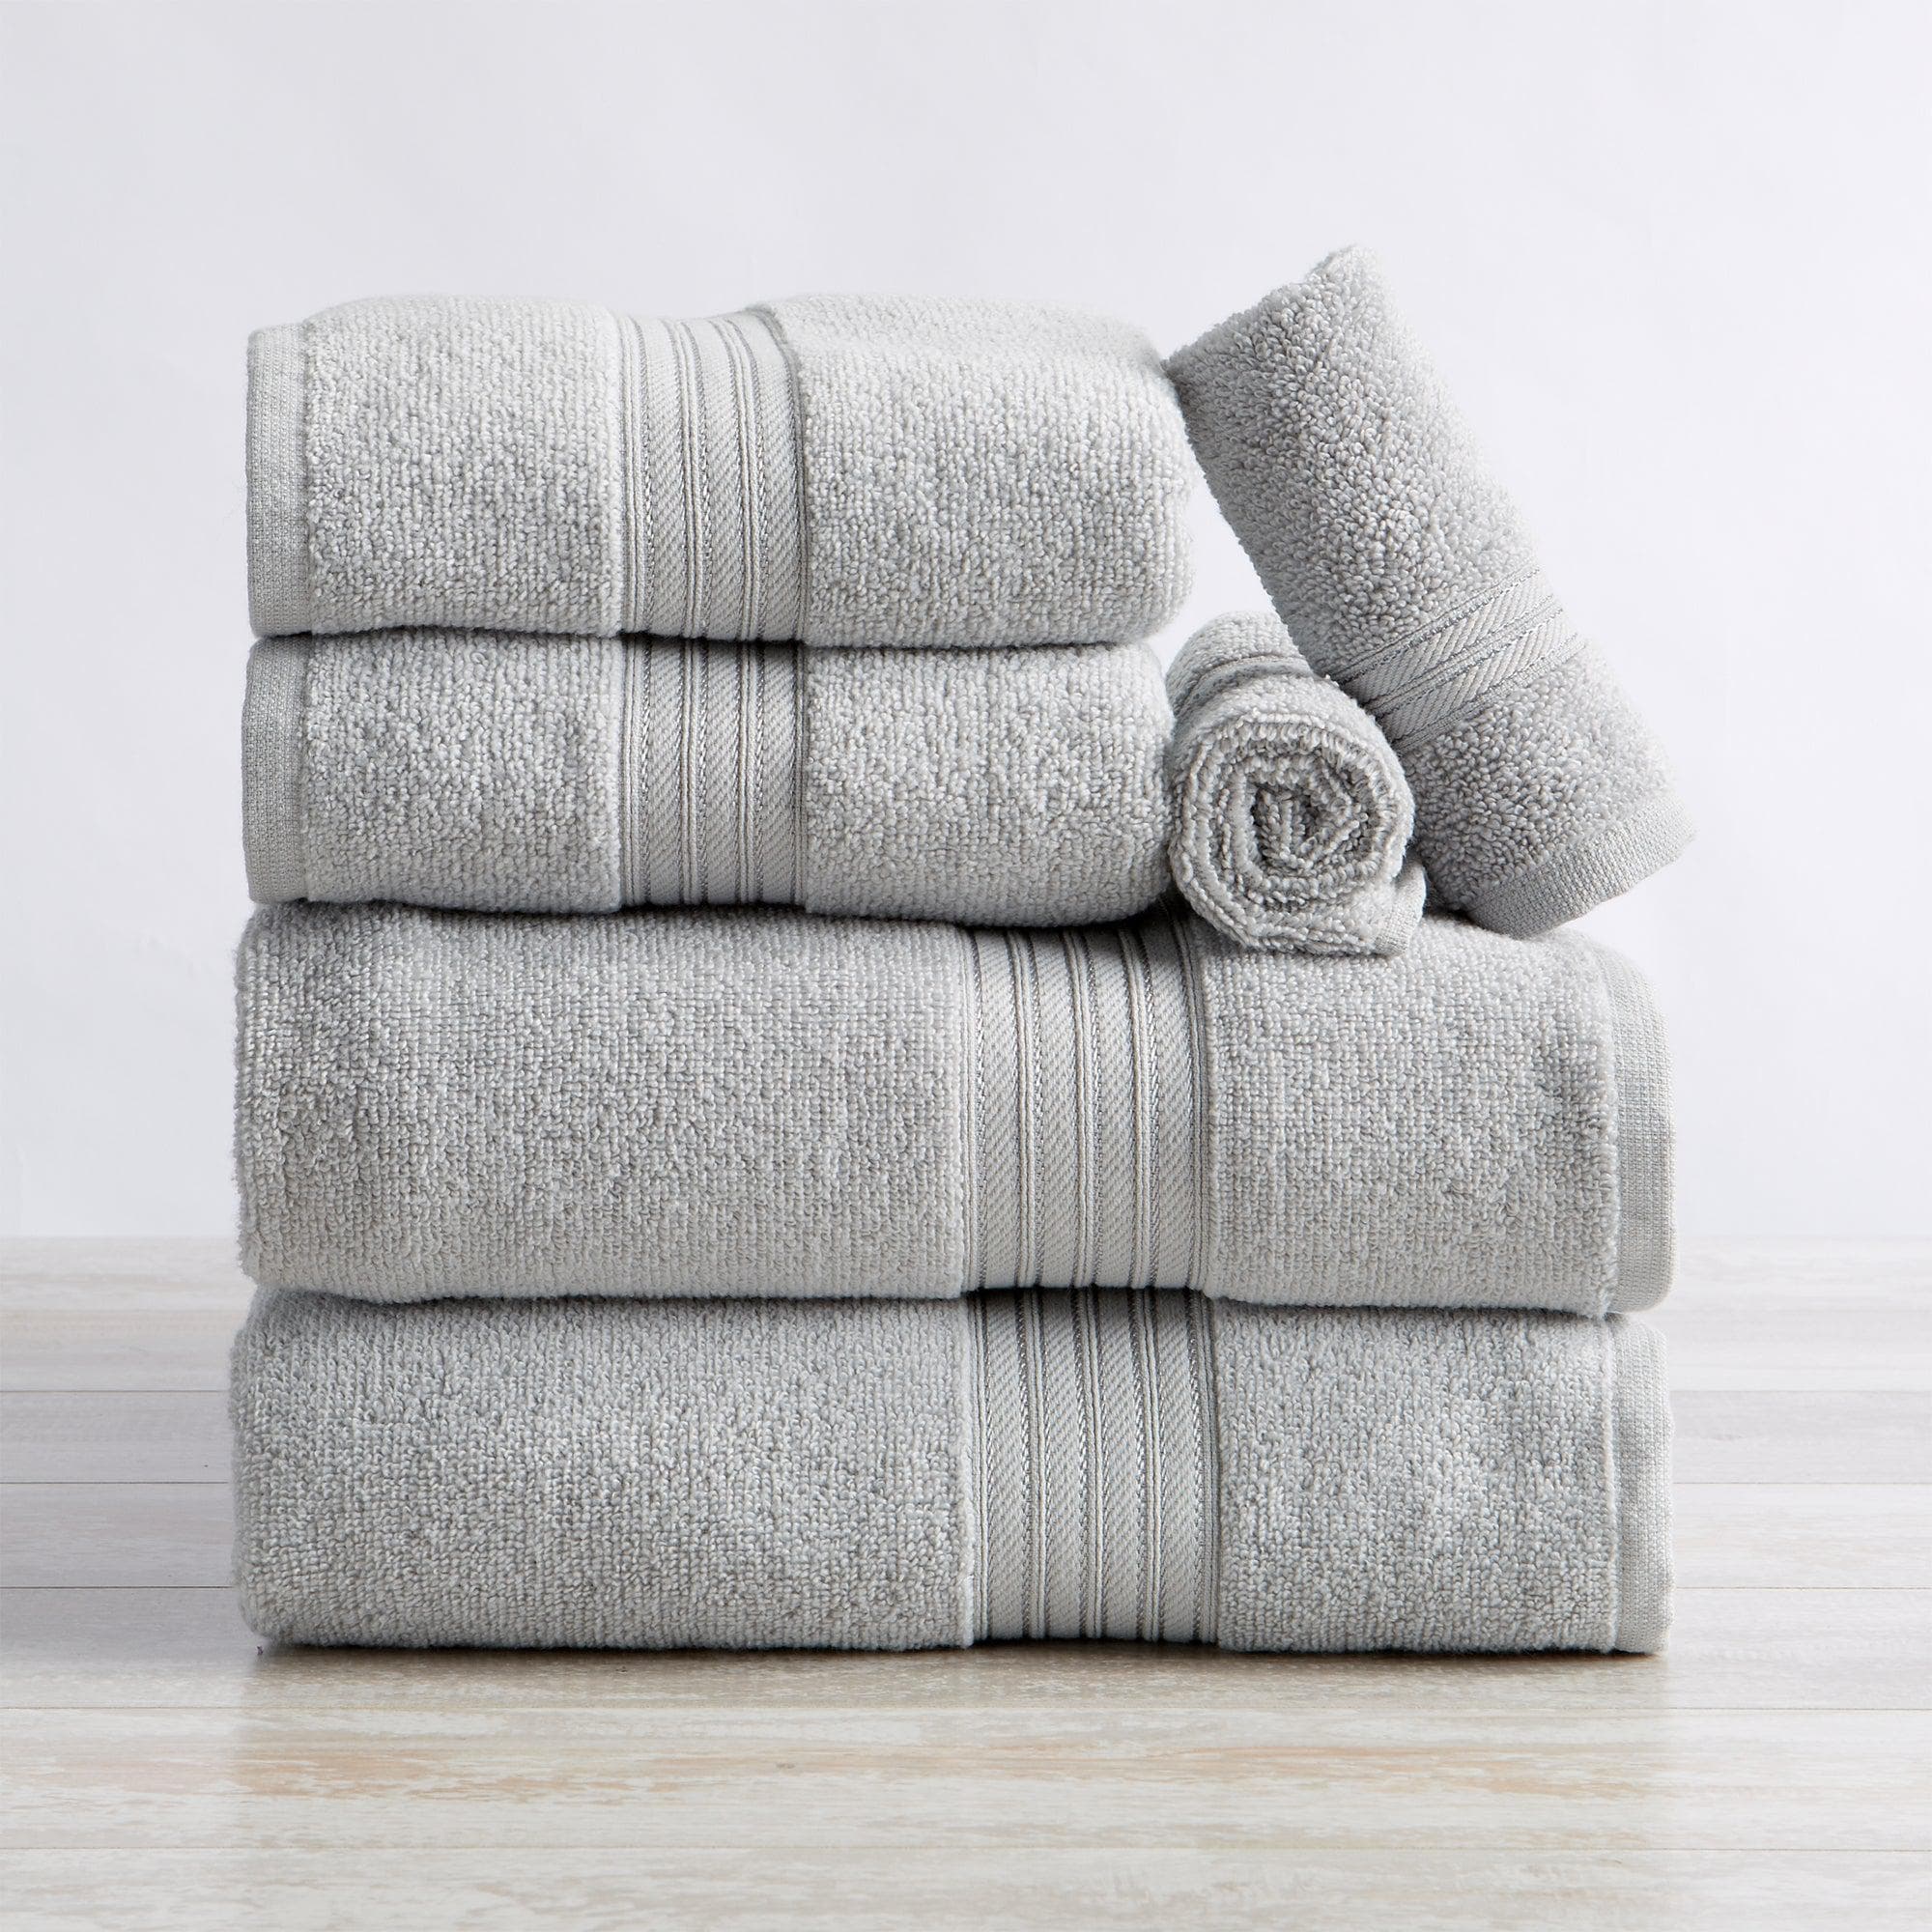 Timberlake Lavish Home 6-Piece Quick Dry Towel Set in Silver